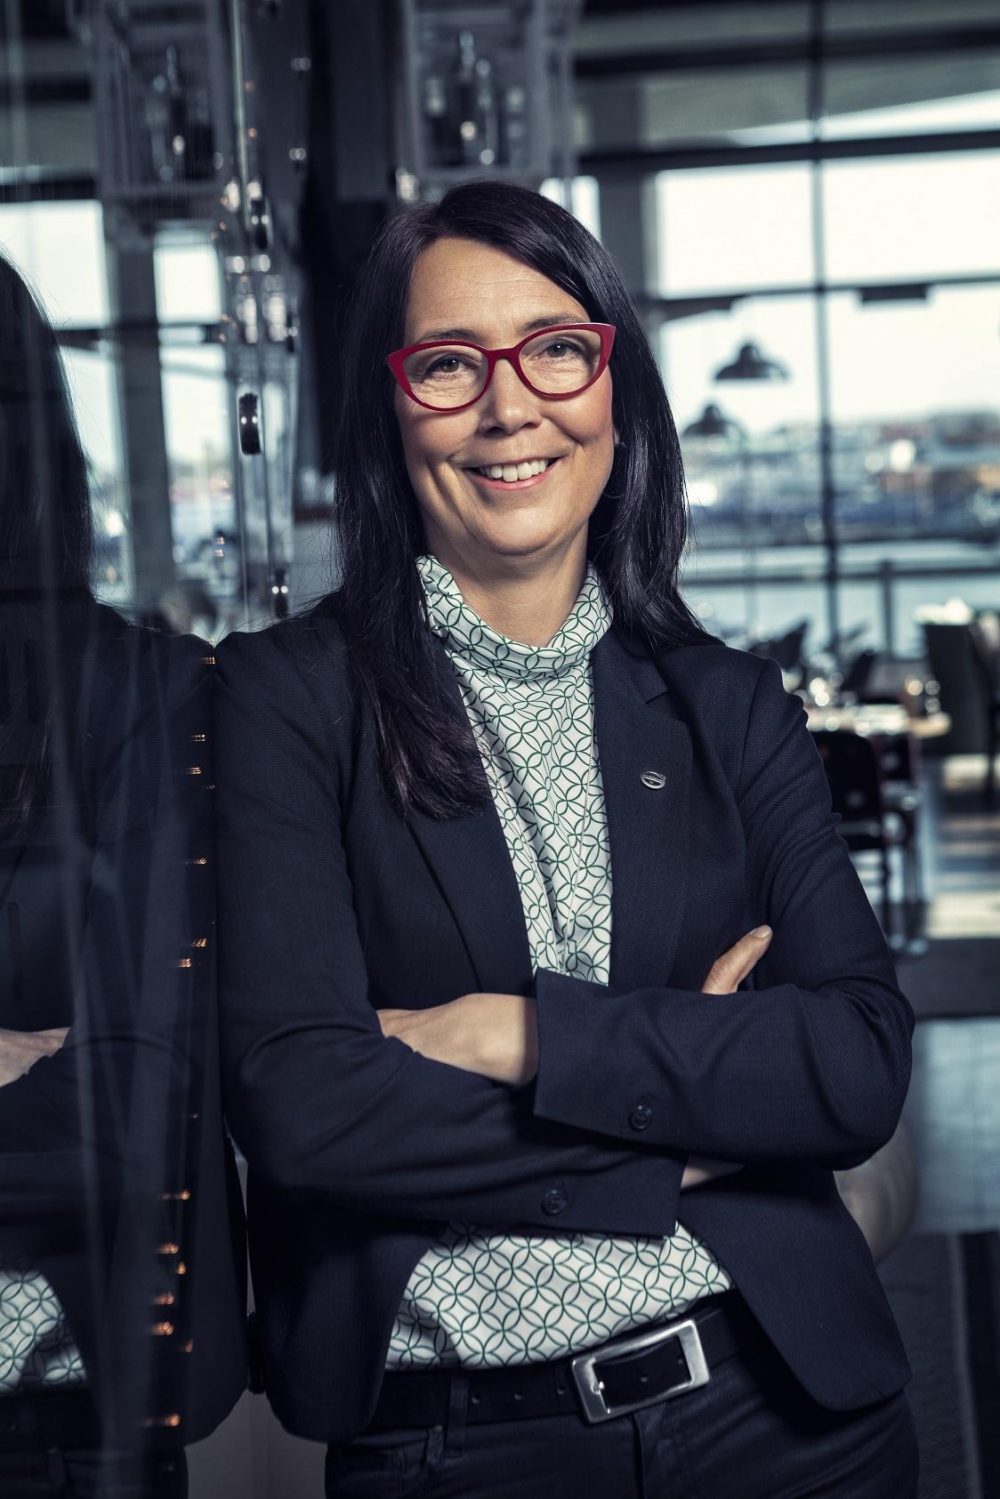 Anna Thordén is Product Manager for Electromobility at Volvo Trucks. Prior to this, she worked as Chief Project Manager for many years at Volvo GTT, mainly on electromobility projects.